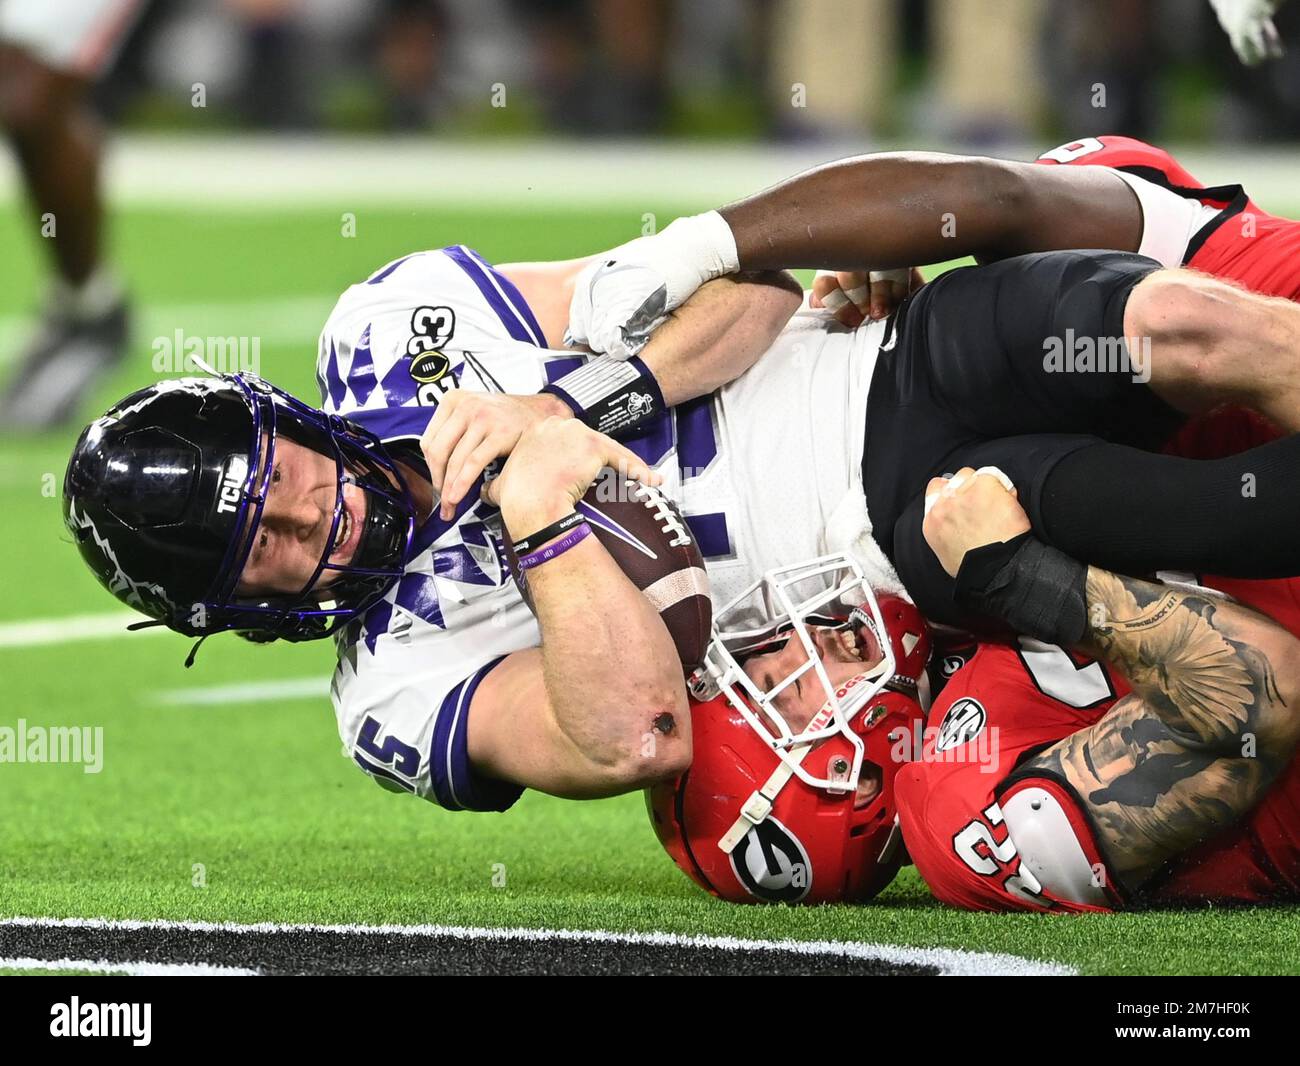 Inglewood, United States. 09th Jan, 2023. TCU Horned Frogs Max Duggan is tackled after a short gain in the second quarter at the 2023 NCAA College Football National Championship between Georgia and TCU at SoFi Stadium in Inglewood, California, on Monday, January 9, 2023. Photo by Mike Goulding/UPI Credit: UPI/Alamy Live News Stock Photo